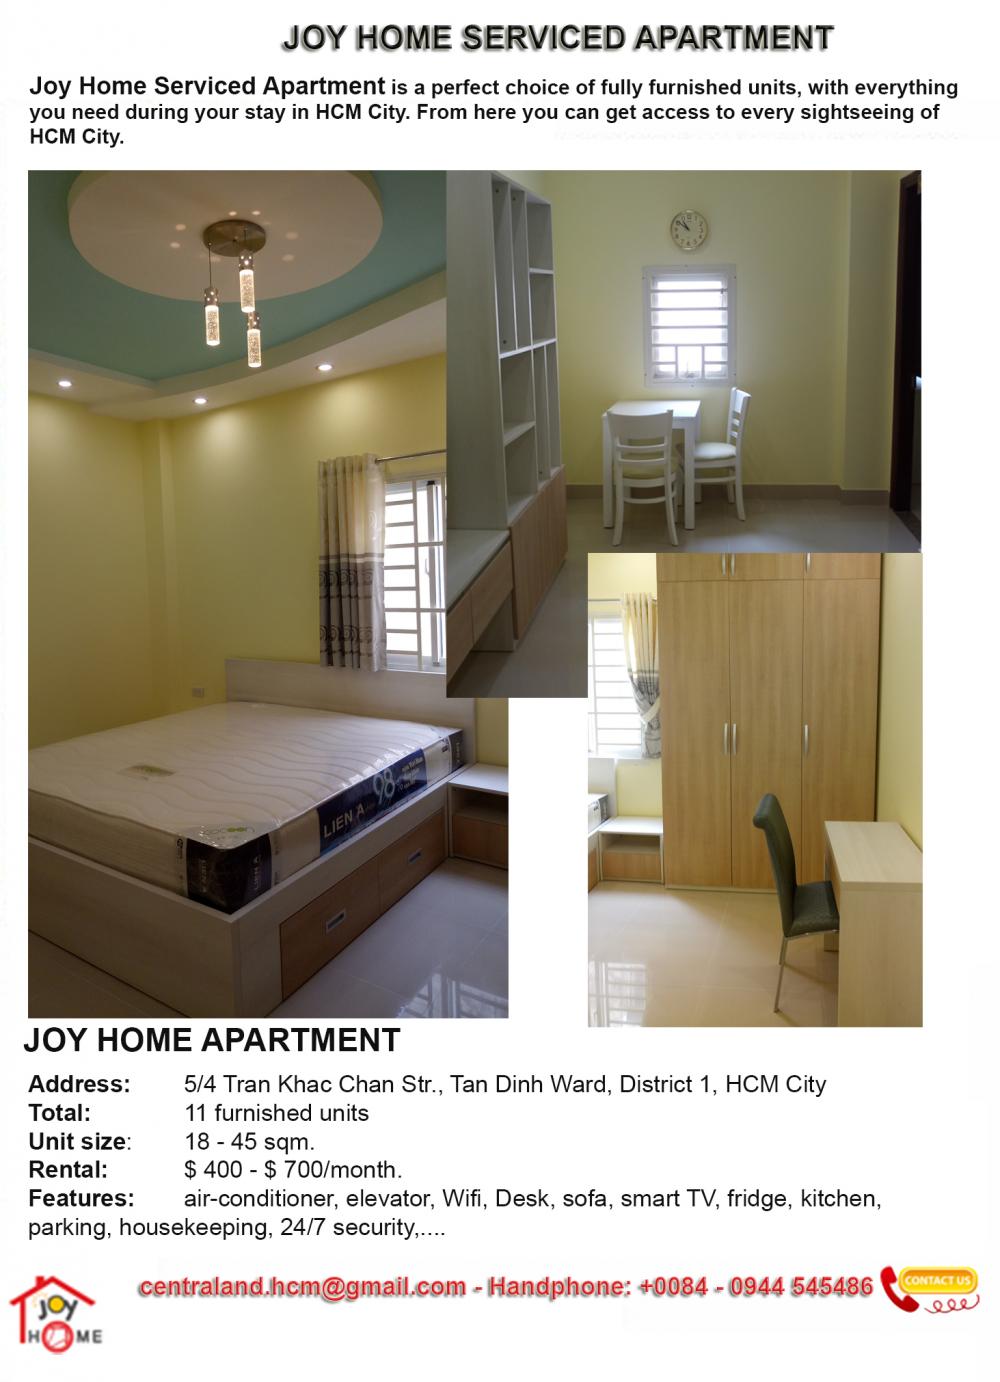 Fully-Serviced apartment JOY HOME,  located just at the centre of District 1, HCMC.